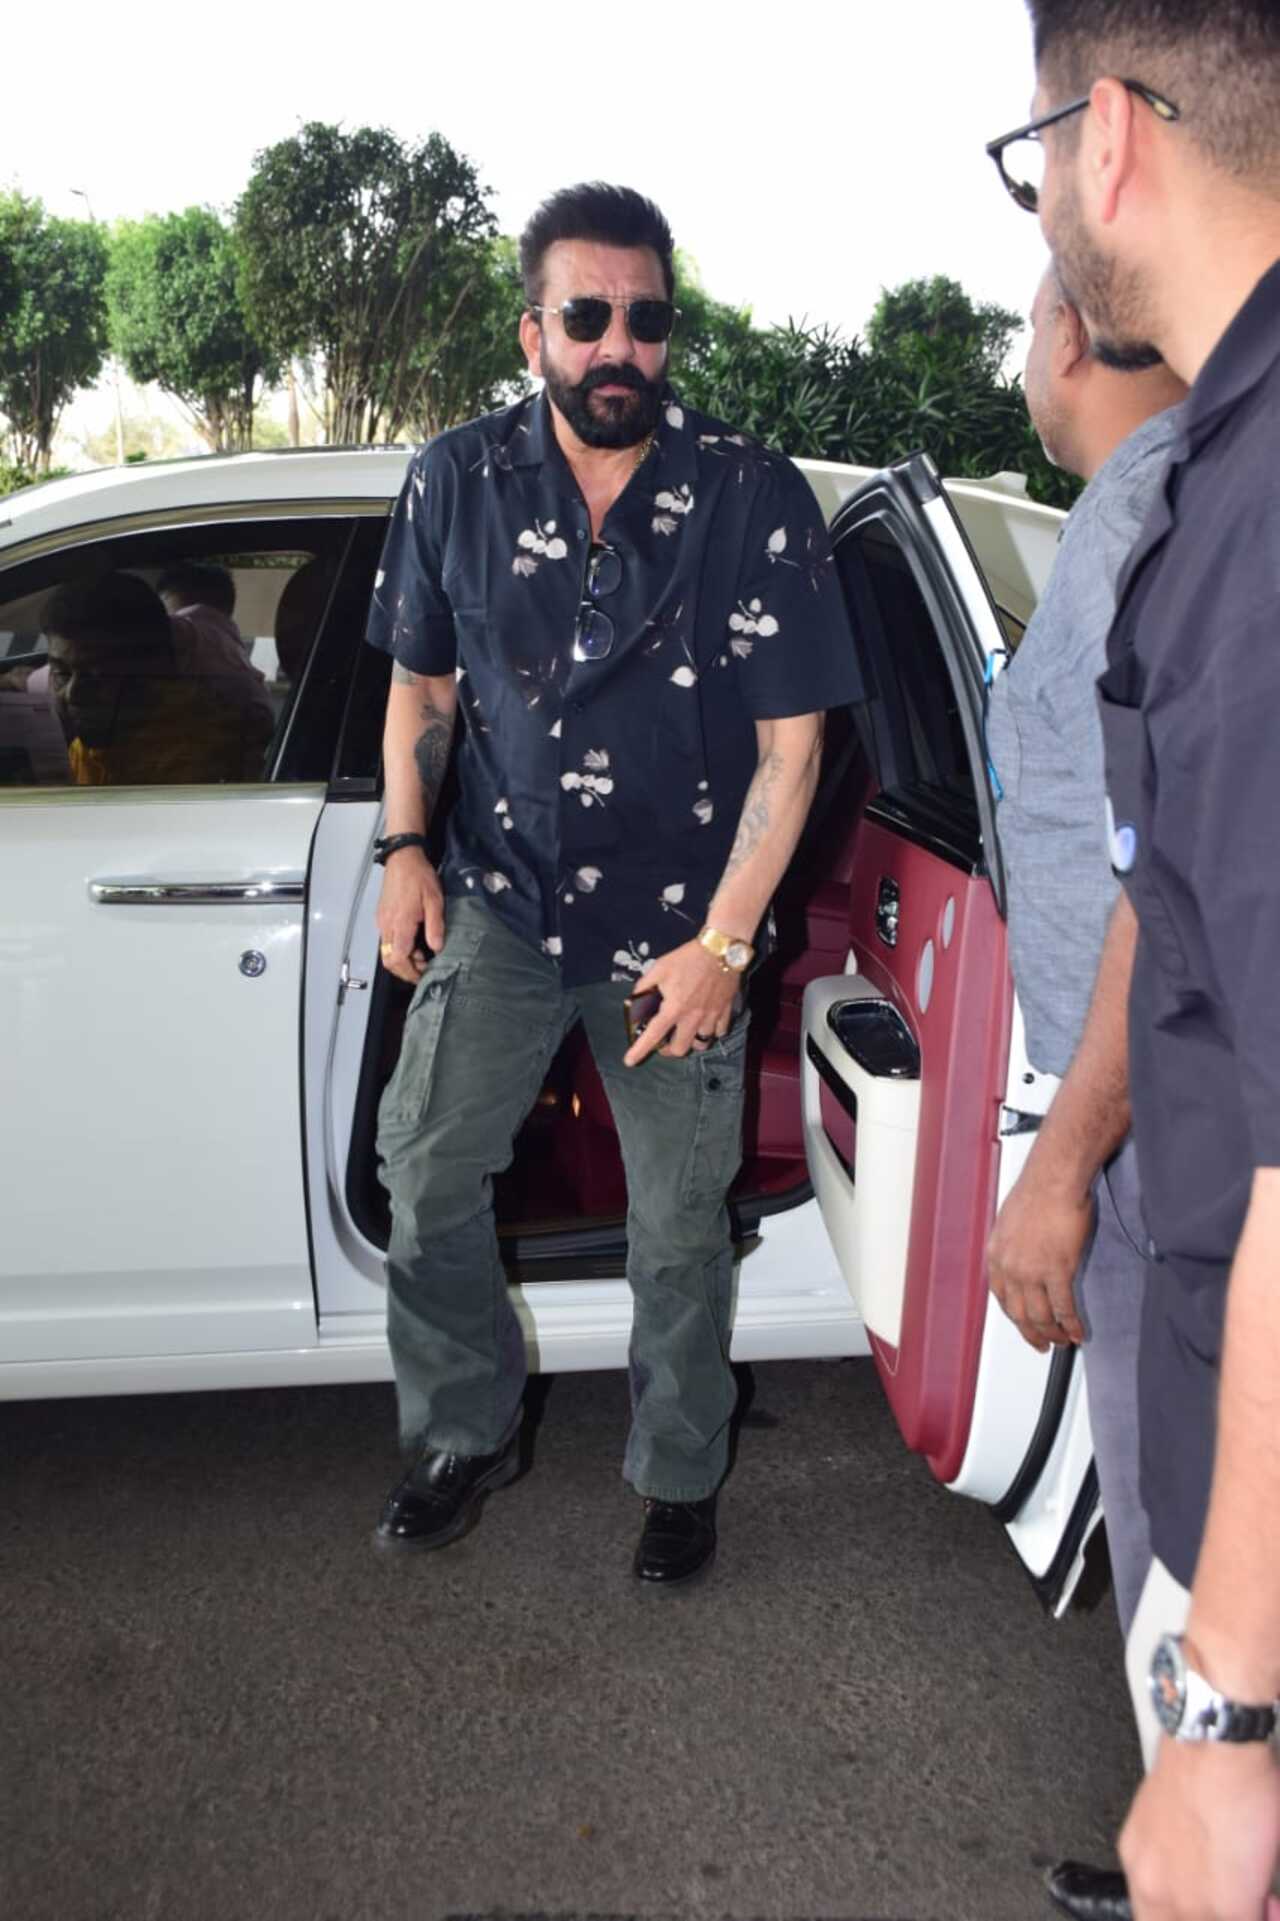 Sanjay Dutt arrived at the Mumbai airport in his Rolls Royce turning heads with his stylish and luxurious entry